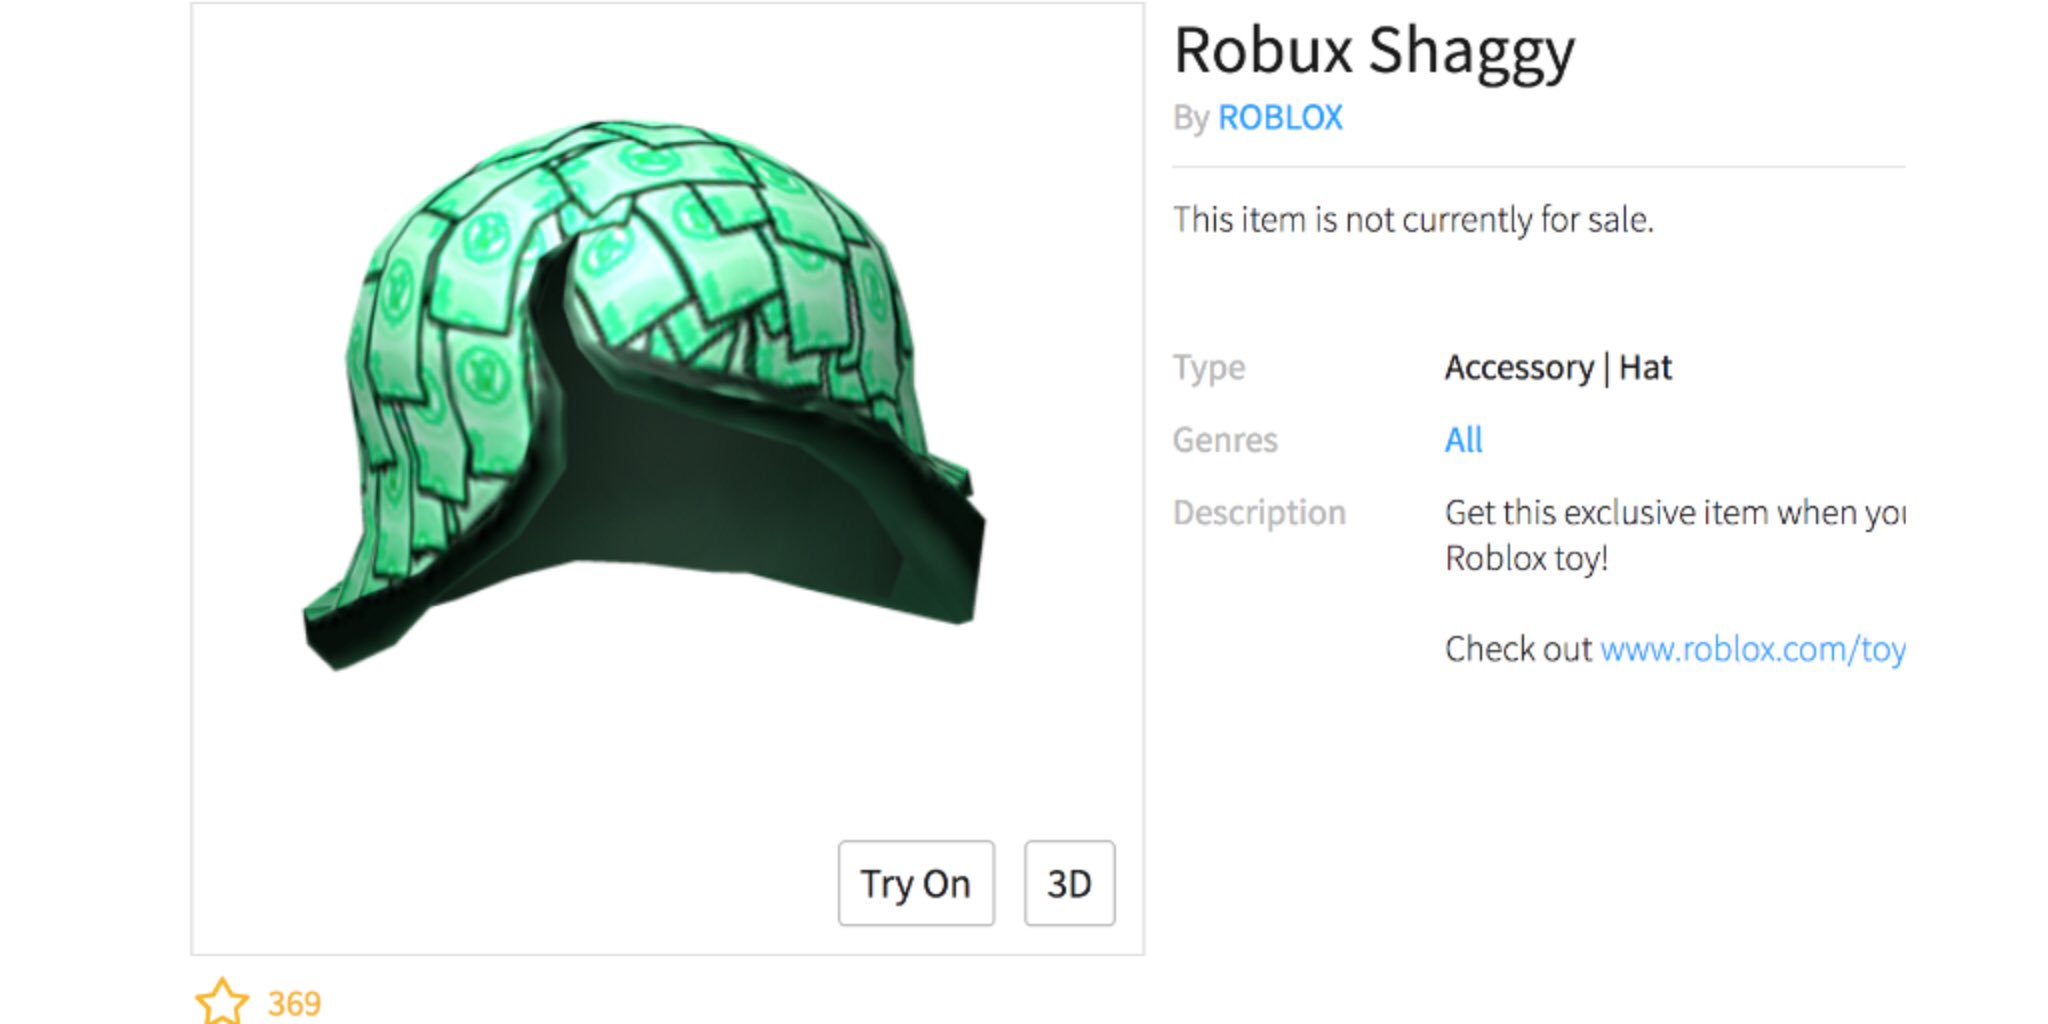 Lily On Twitter Looks Like The Robux Shaggy Is In An Upcoming Core Pack Or Playset Or Maybe A New Chaser It S Not In The Blind Boxes Cause No One Has It - robux shaggy code